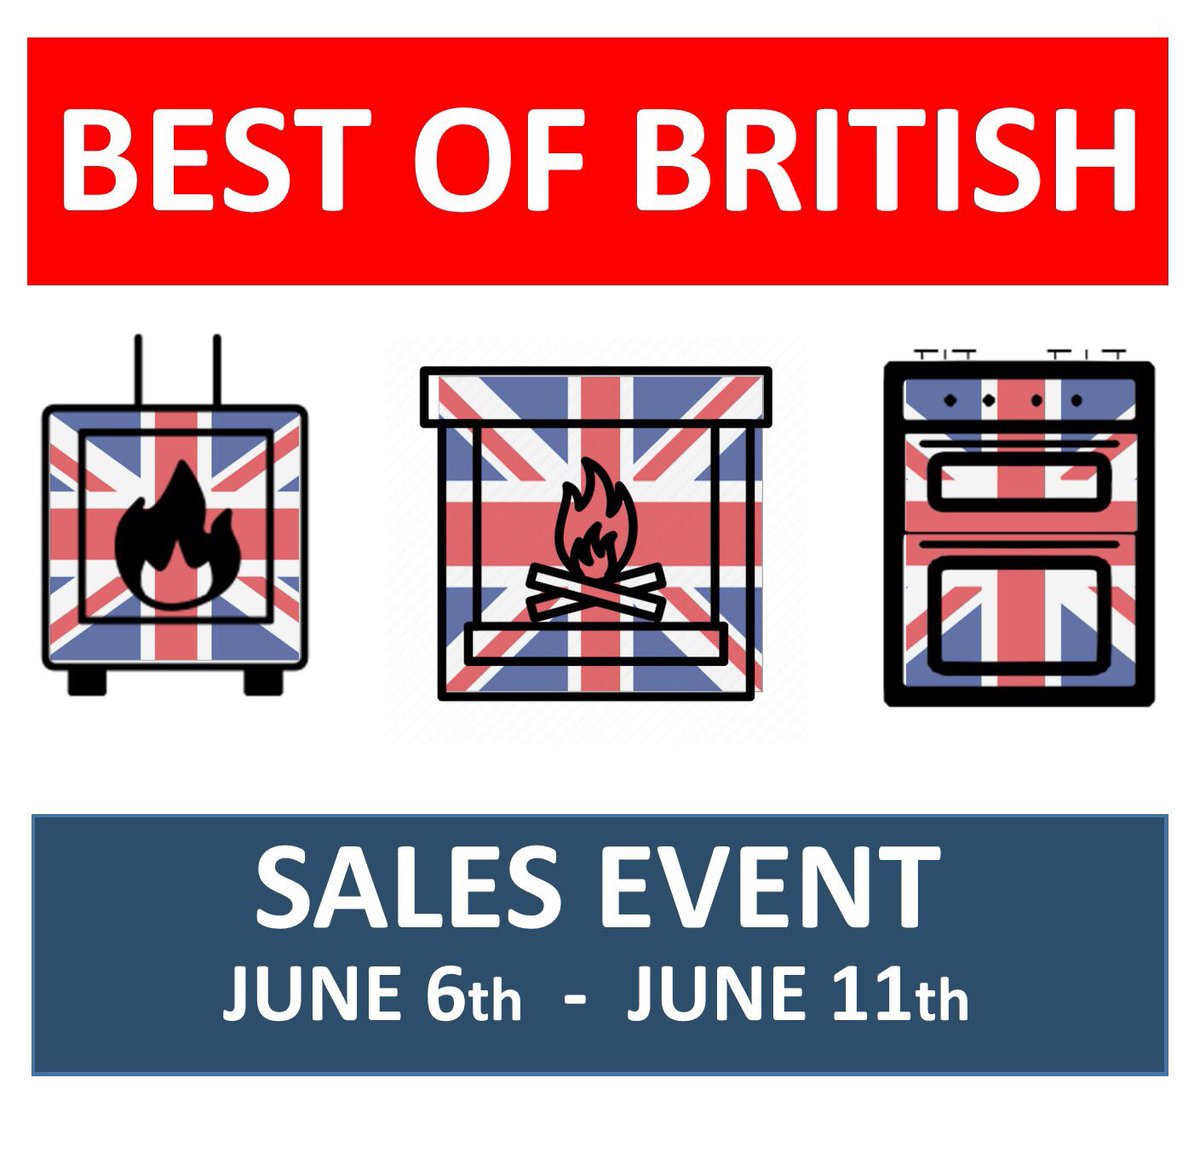 Celebrate the Platinum Jubilee with our 'Best of British' Event between 6th - 11th June. SAVE up to £200* on wood burning stoves even more than our usual unbeatable prices! Don't miss our event and support British Manufacturers! Visit our website for more info